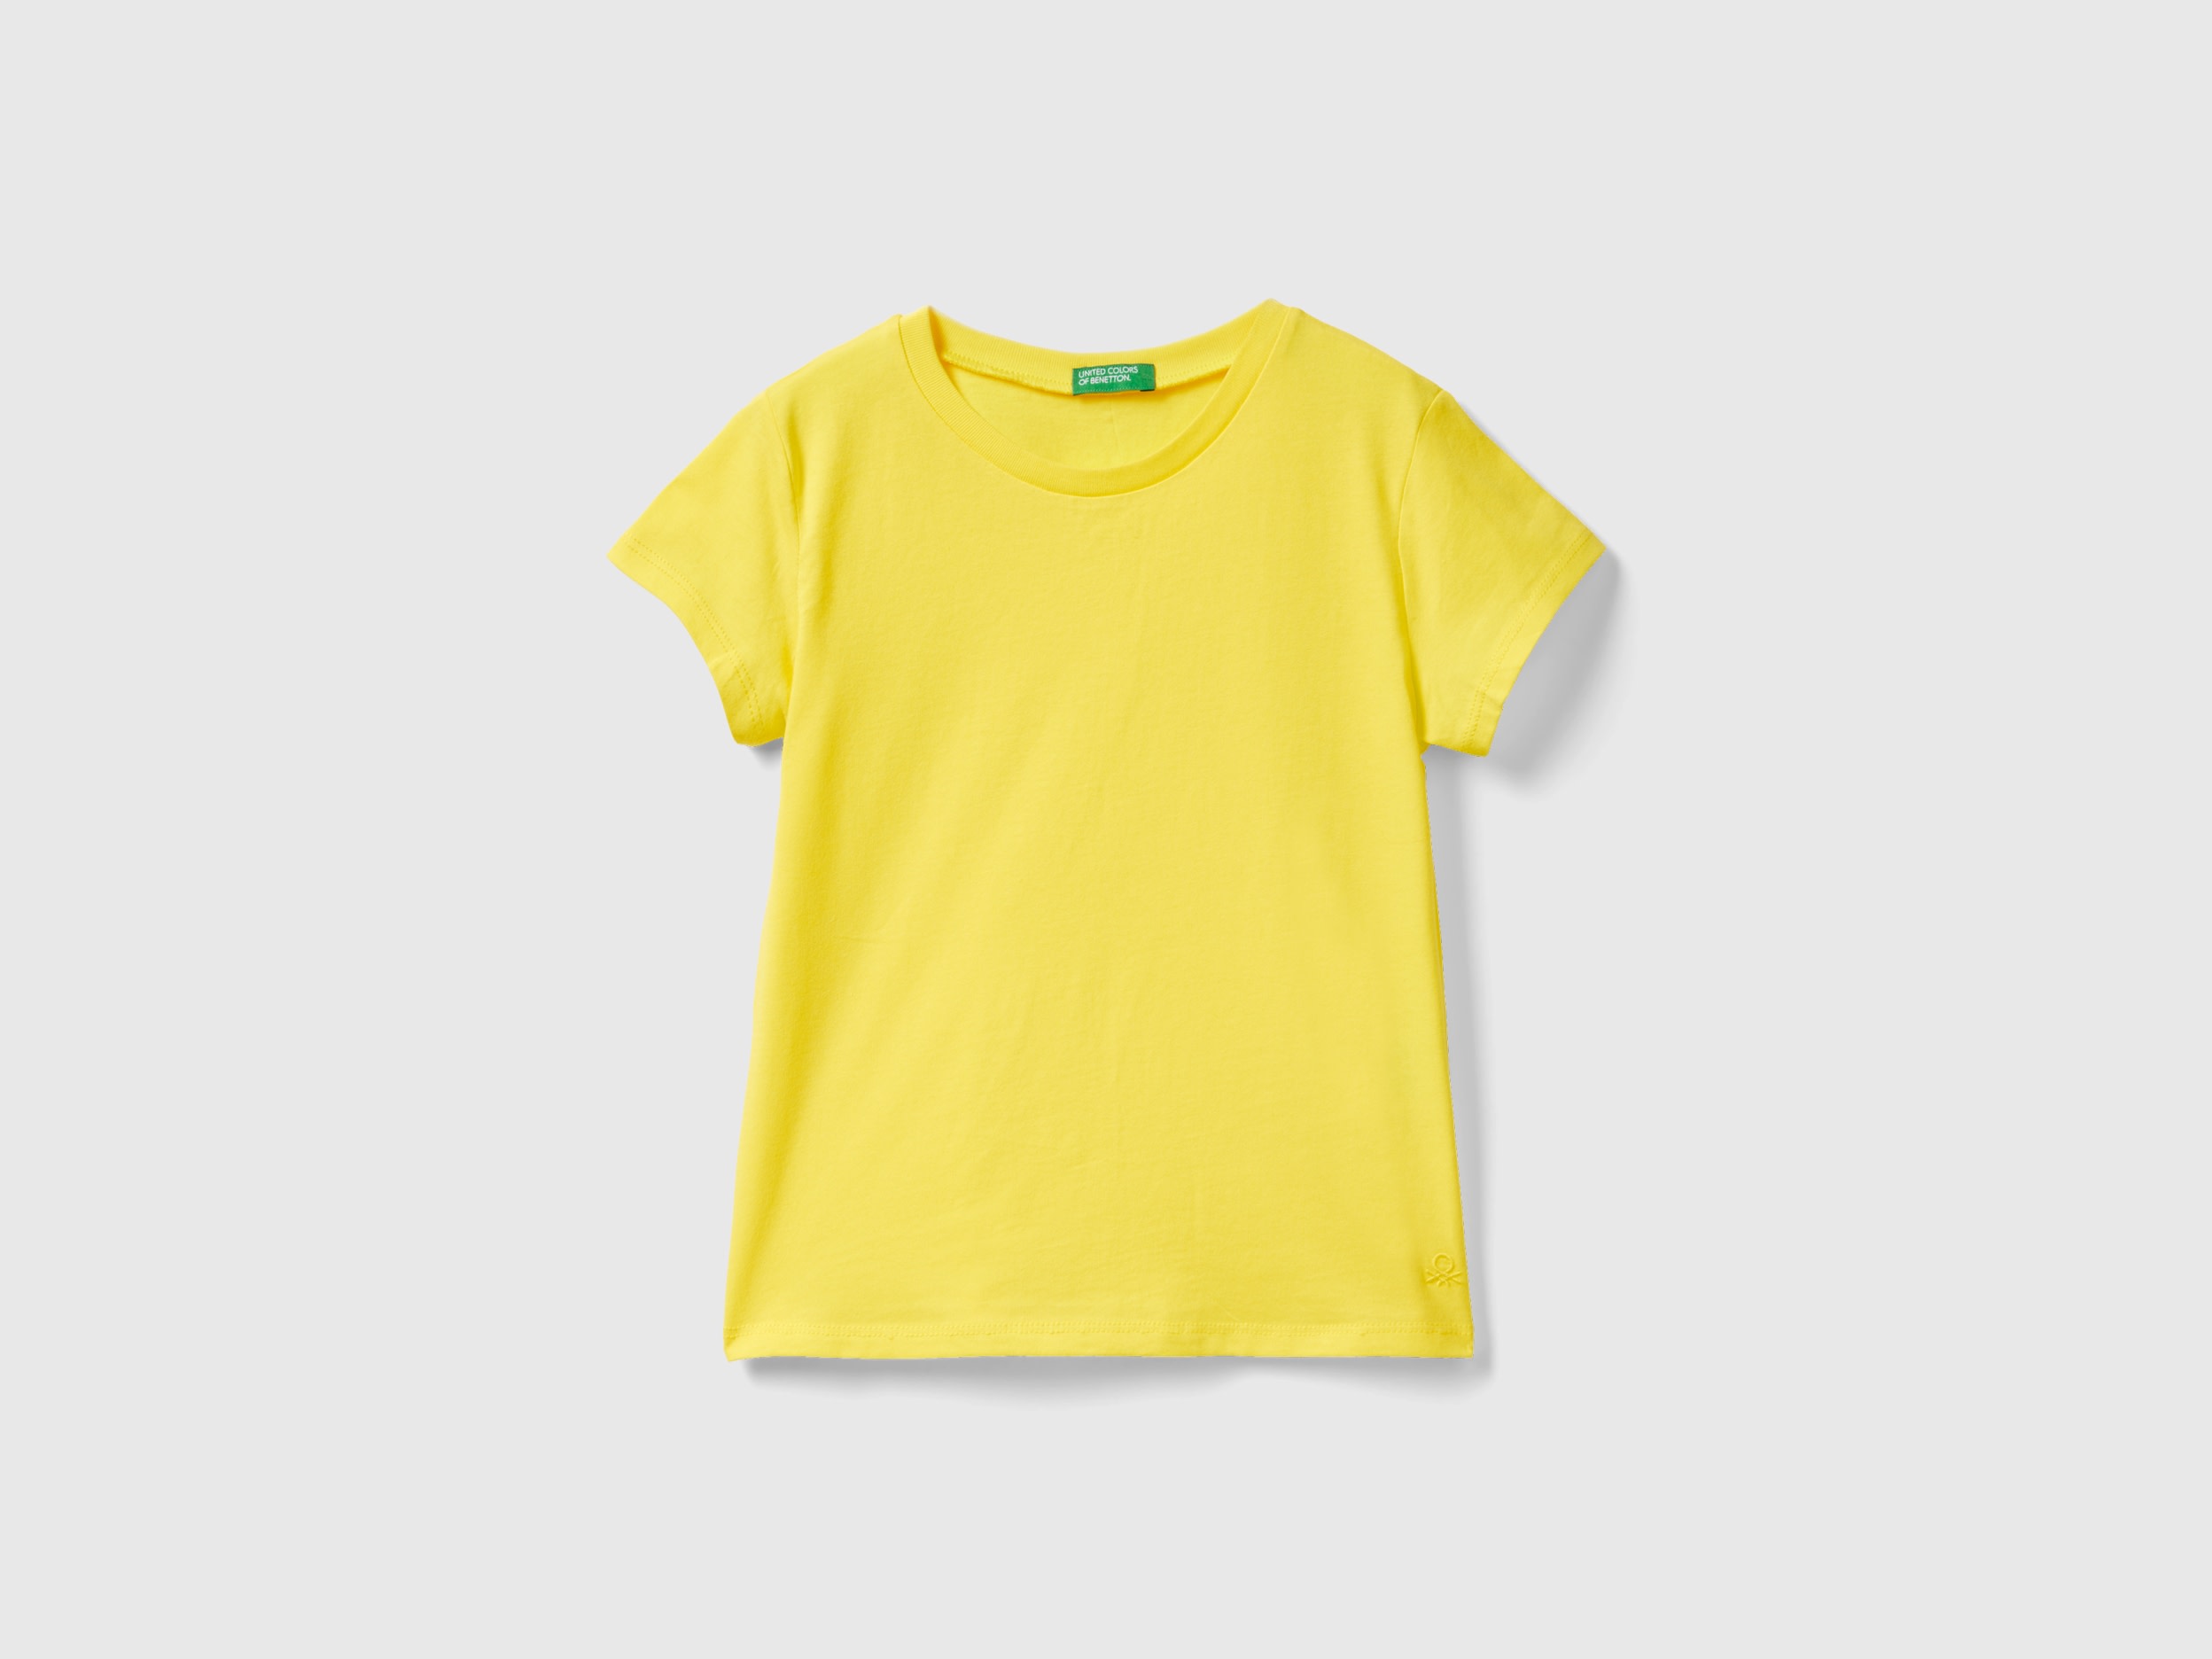 Image of Benetton, T-shirt In Pure Organic Cotton, size L, Yellow, Kids